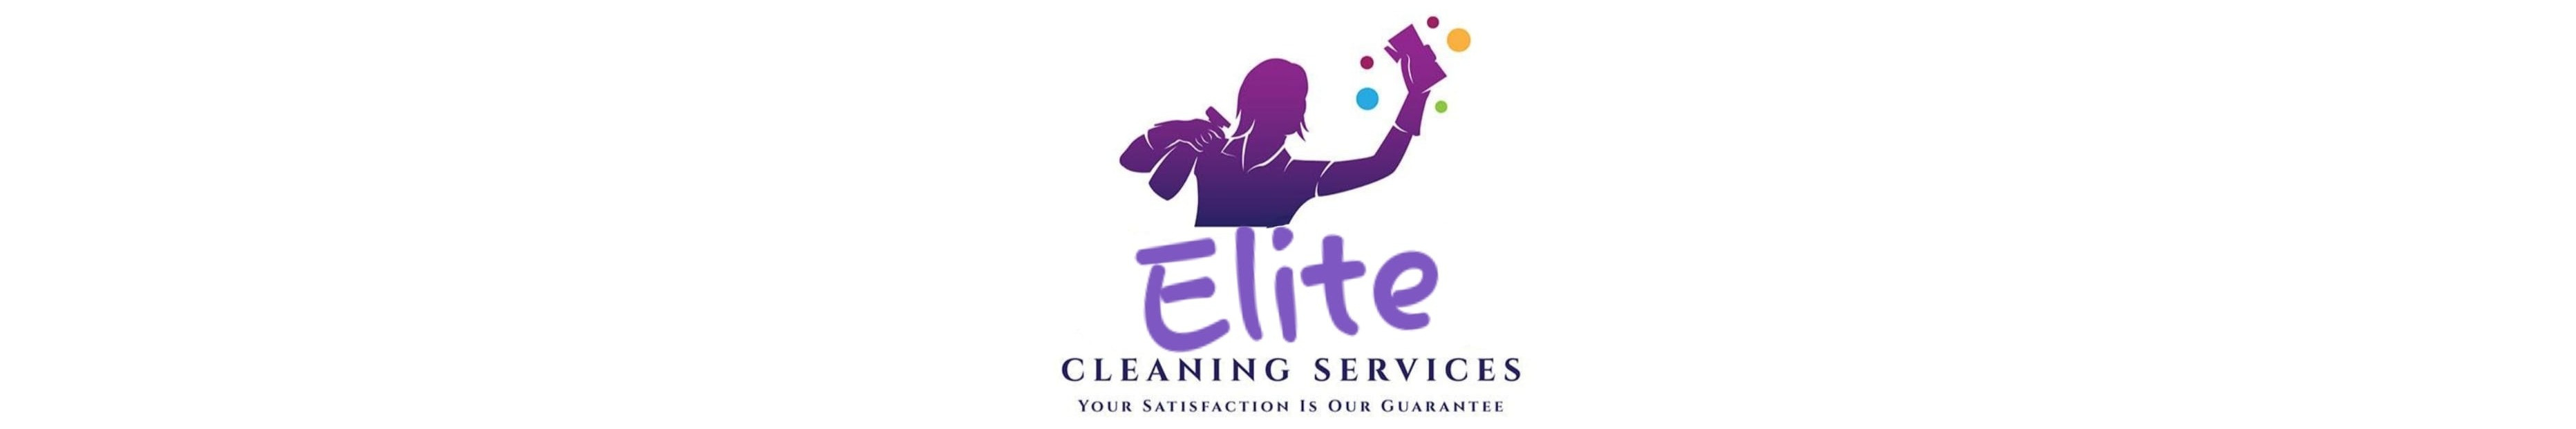 Apartments/Villas/Offices/Houses cleaning